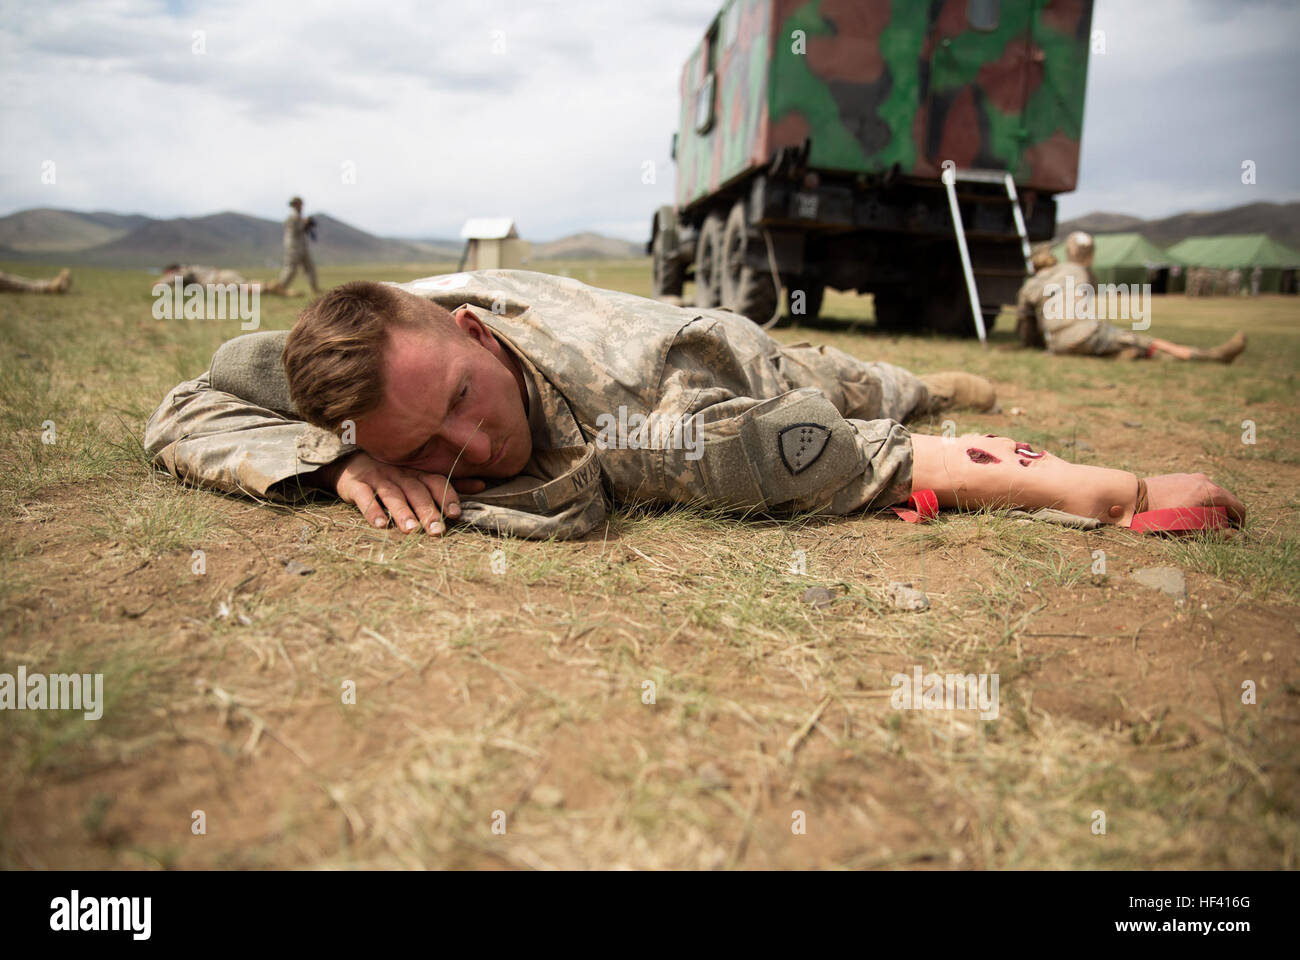 Army Sgt. Corey Bryan volunteers to pose as a simulated casualty in a practical application exercise in the combat medical care lane of Khaan Quest 2016 at Five Hills Training Area near Ulaanbaatar, Mongolia, May 30. The training equipped soldiers with essential life-saving skills and the ability to prioritize injuries and medical care. Khaan Quest 2016 is an annual, multinational peacekeeping operations exercise hosted by the Mongolian Armed Forces, co-sponsored by U.S. Pacific Command, and supported by U.S. Army Pacific and U.S. Marine Corps Forces, Pacific. Khaan Quest, in its 14th iteratio Stock Photo